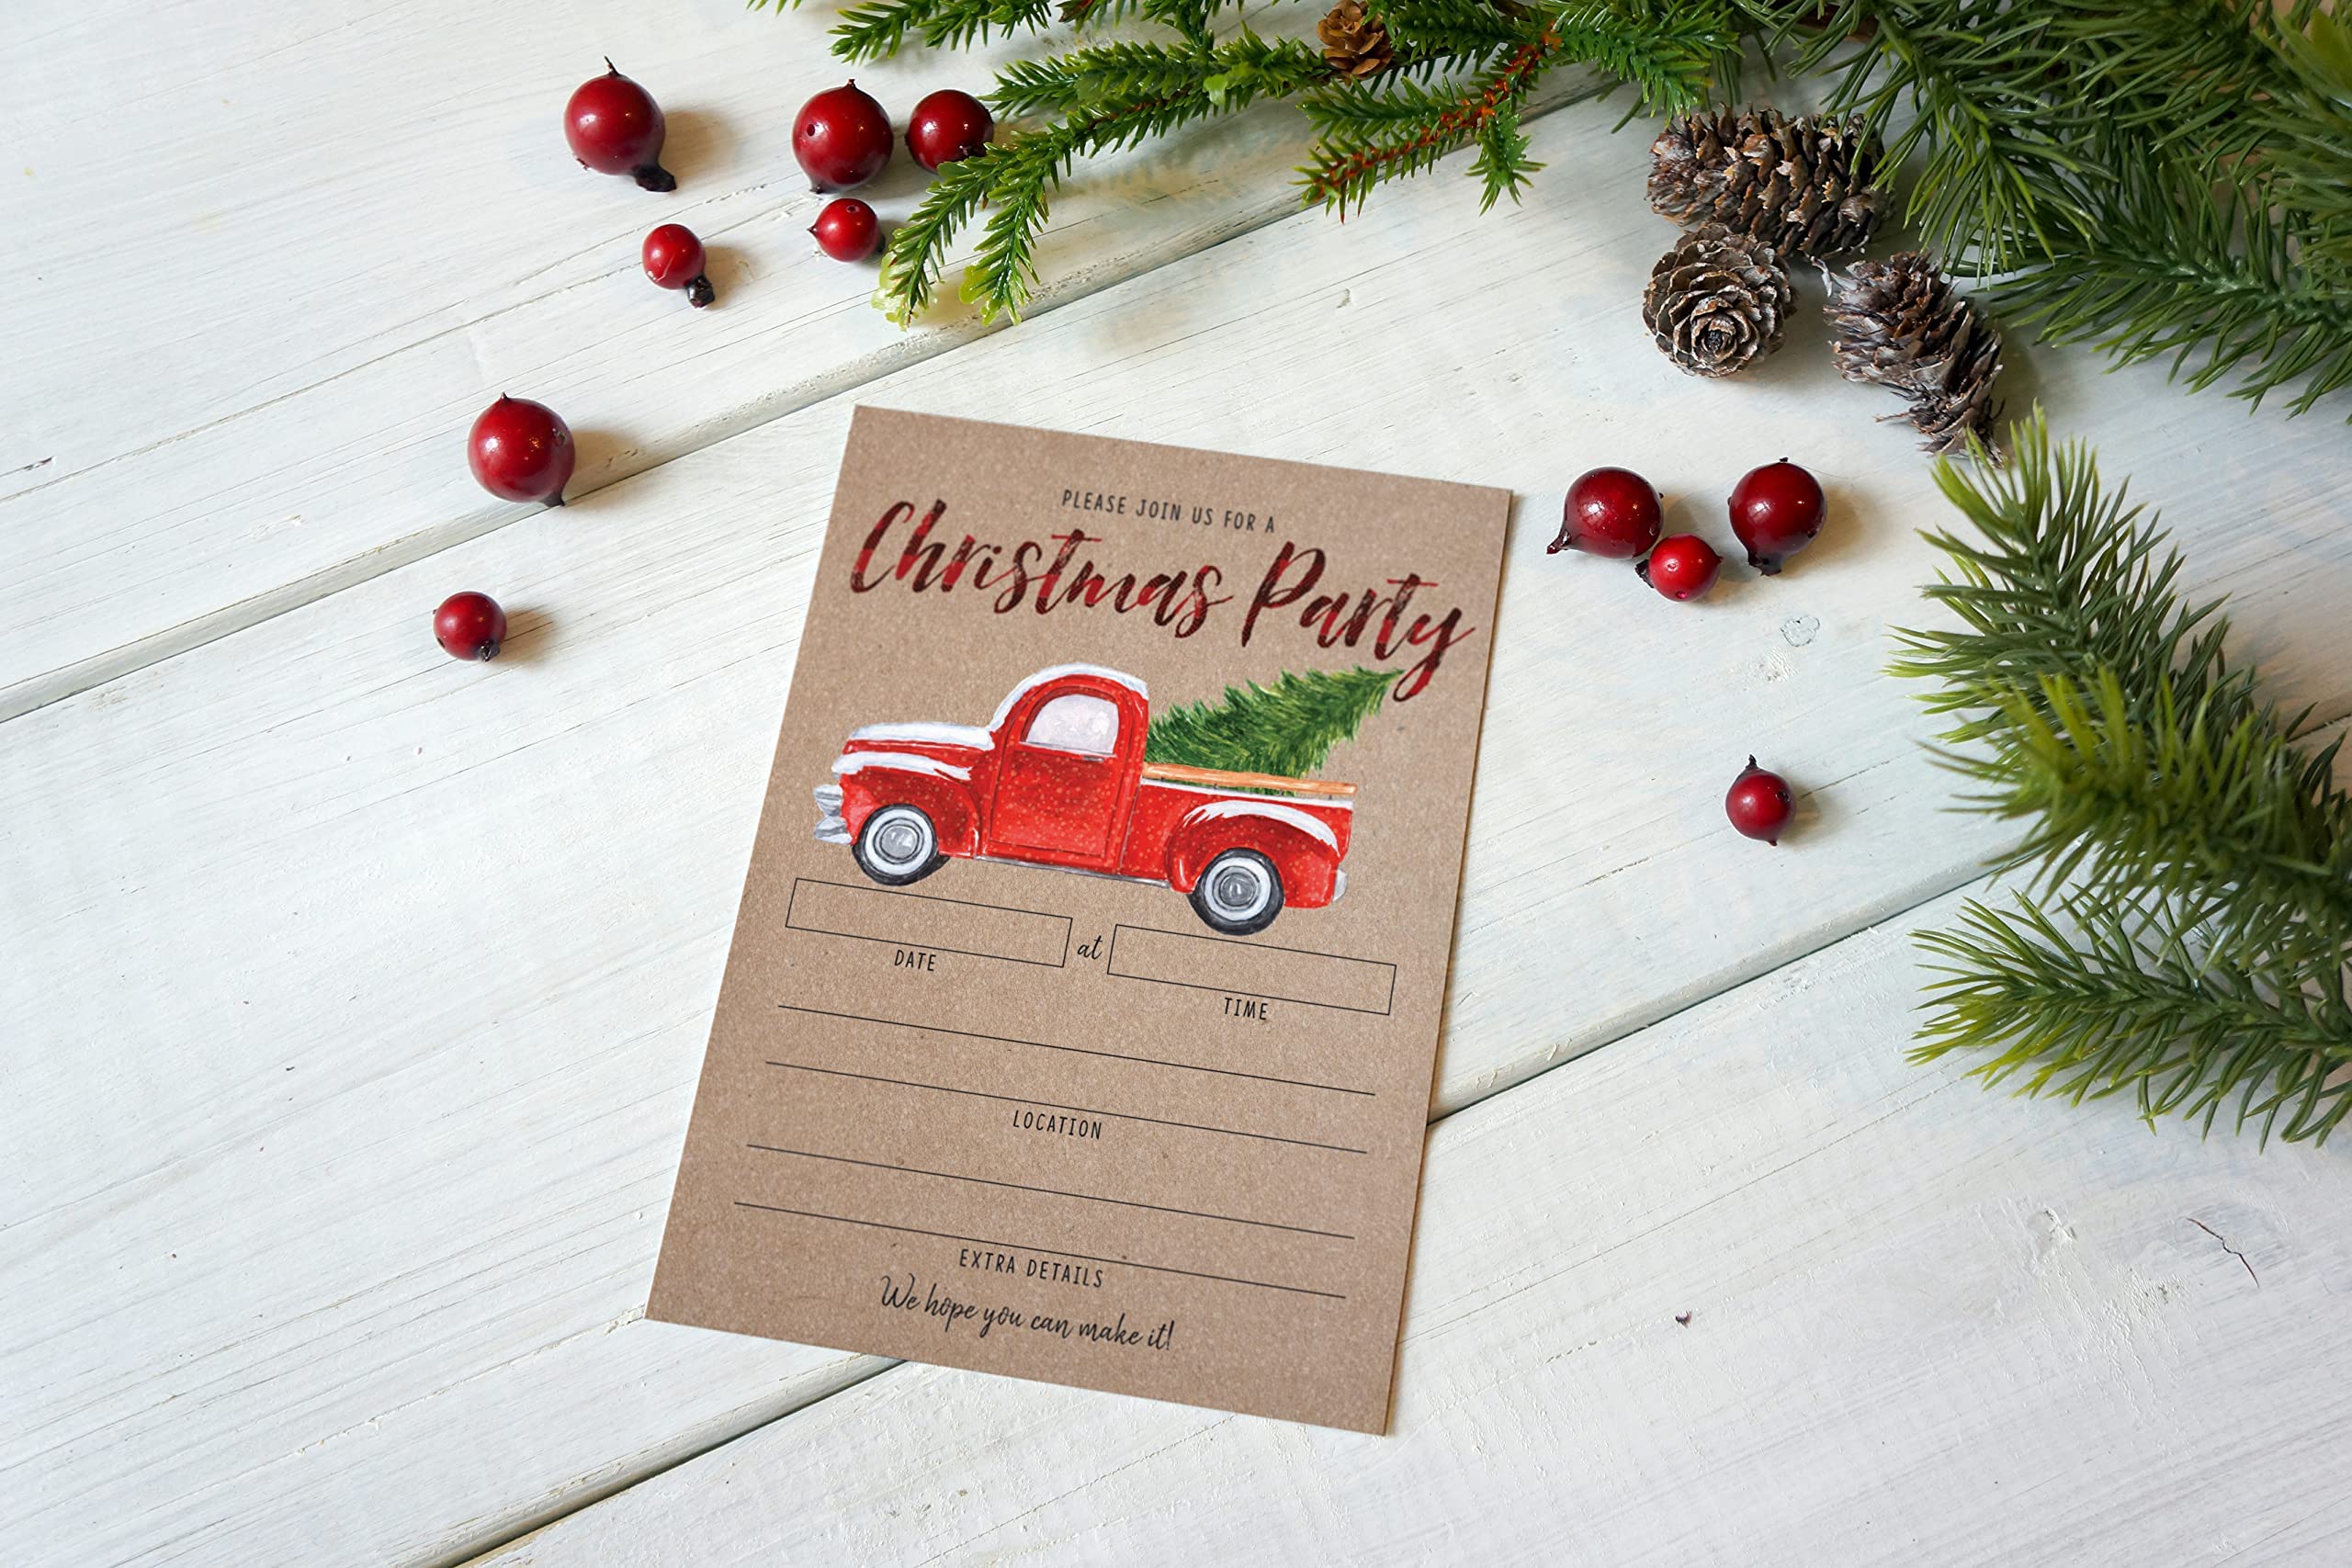 Your Main Event Prints Rustic Christmas Party Invitation with Red Truck and Christmas Tree, Holiday Party Invite, Christmas Party, Holiday Party Invitations, 20 Fill in Invitations and Envelopes